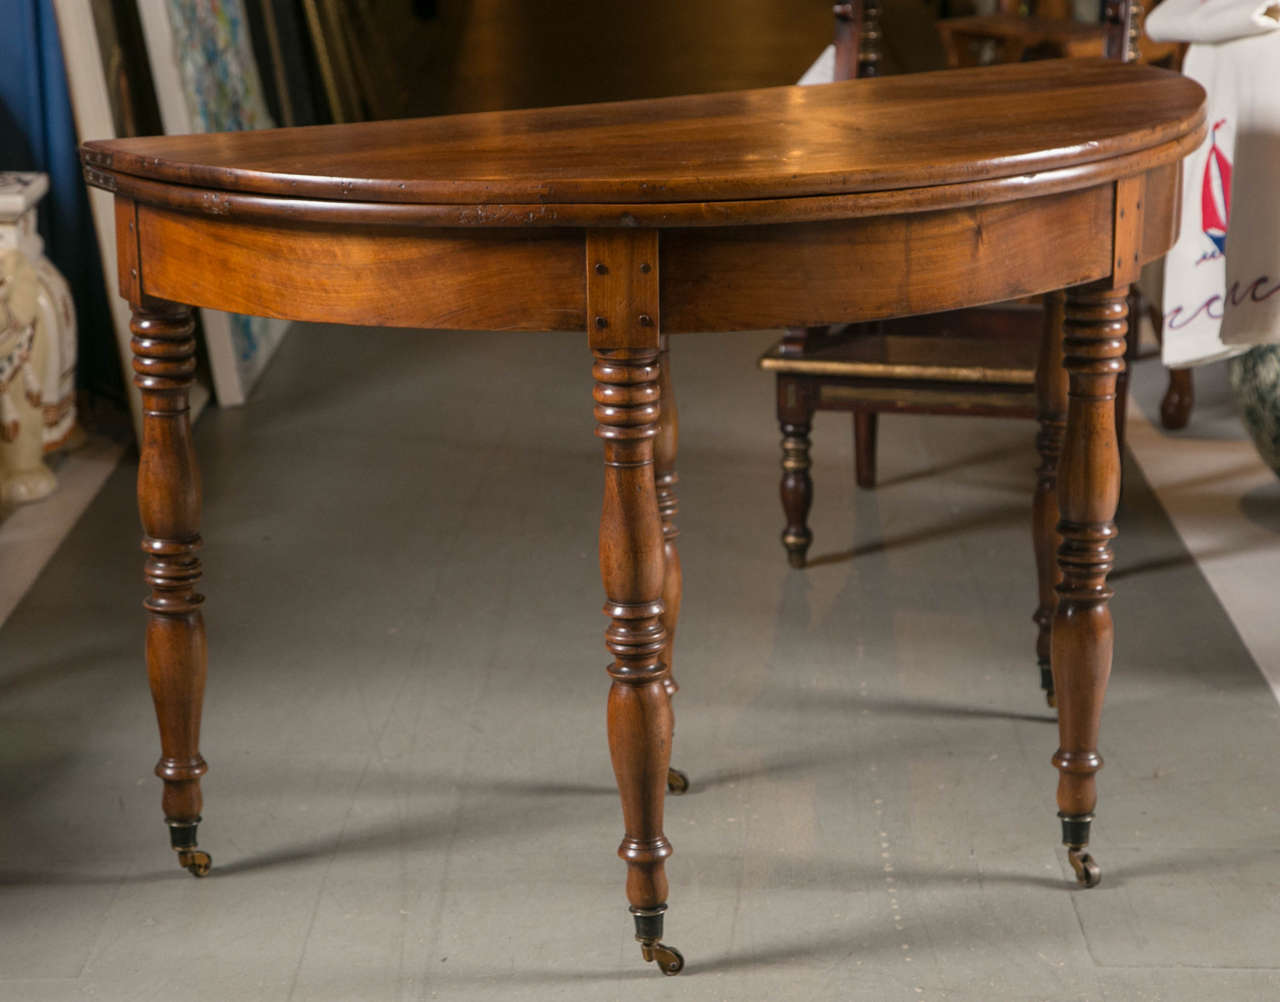 A beautiful red maple French fold over dining and games table. With original casters, circa 1870s.